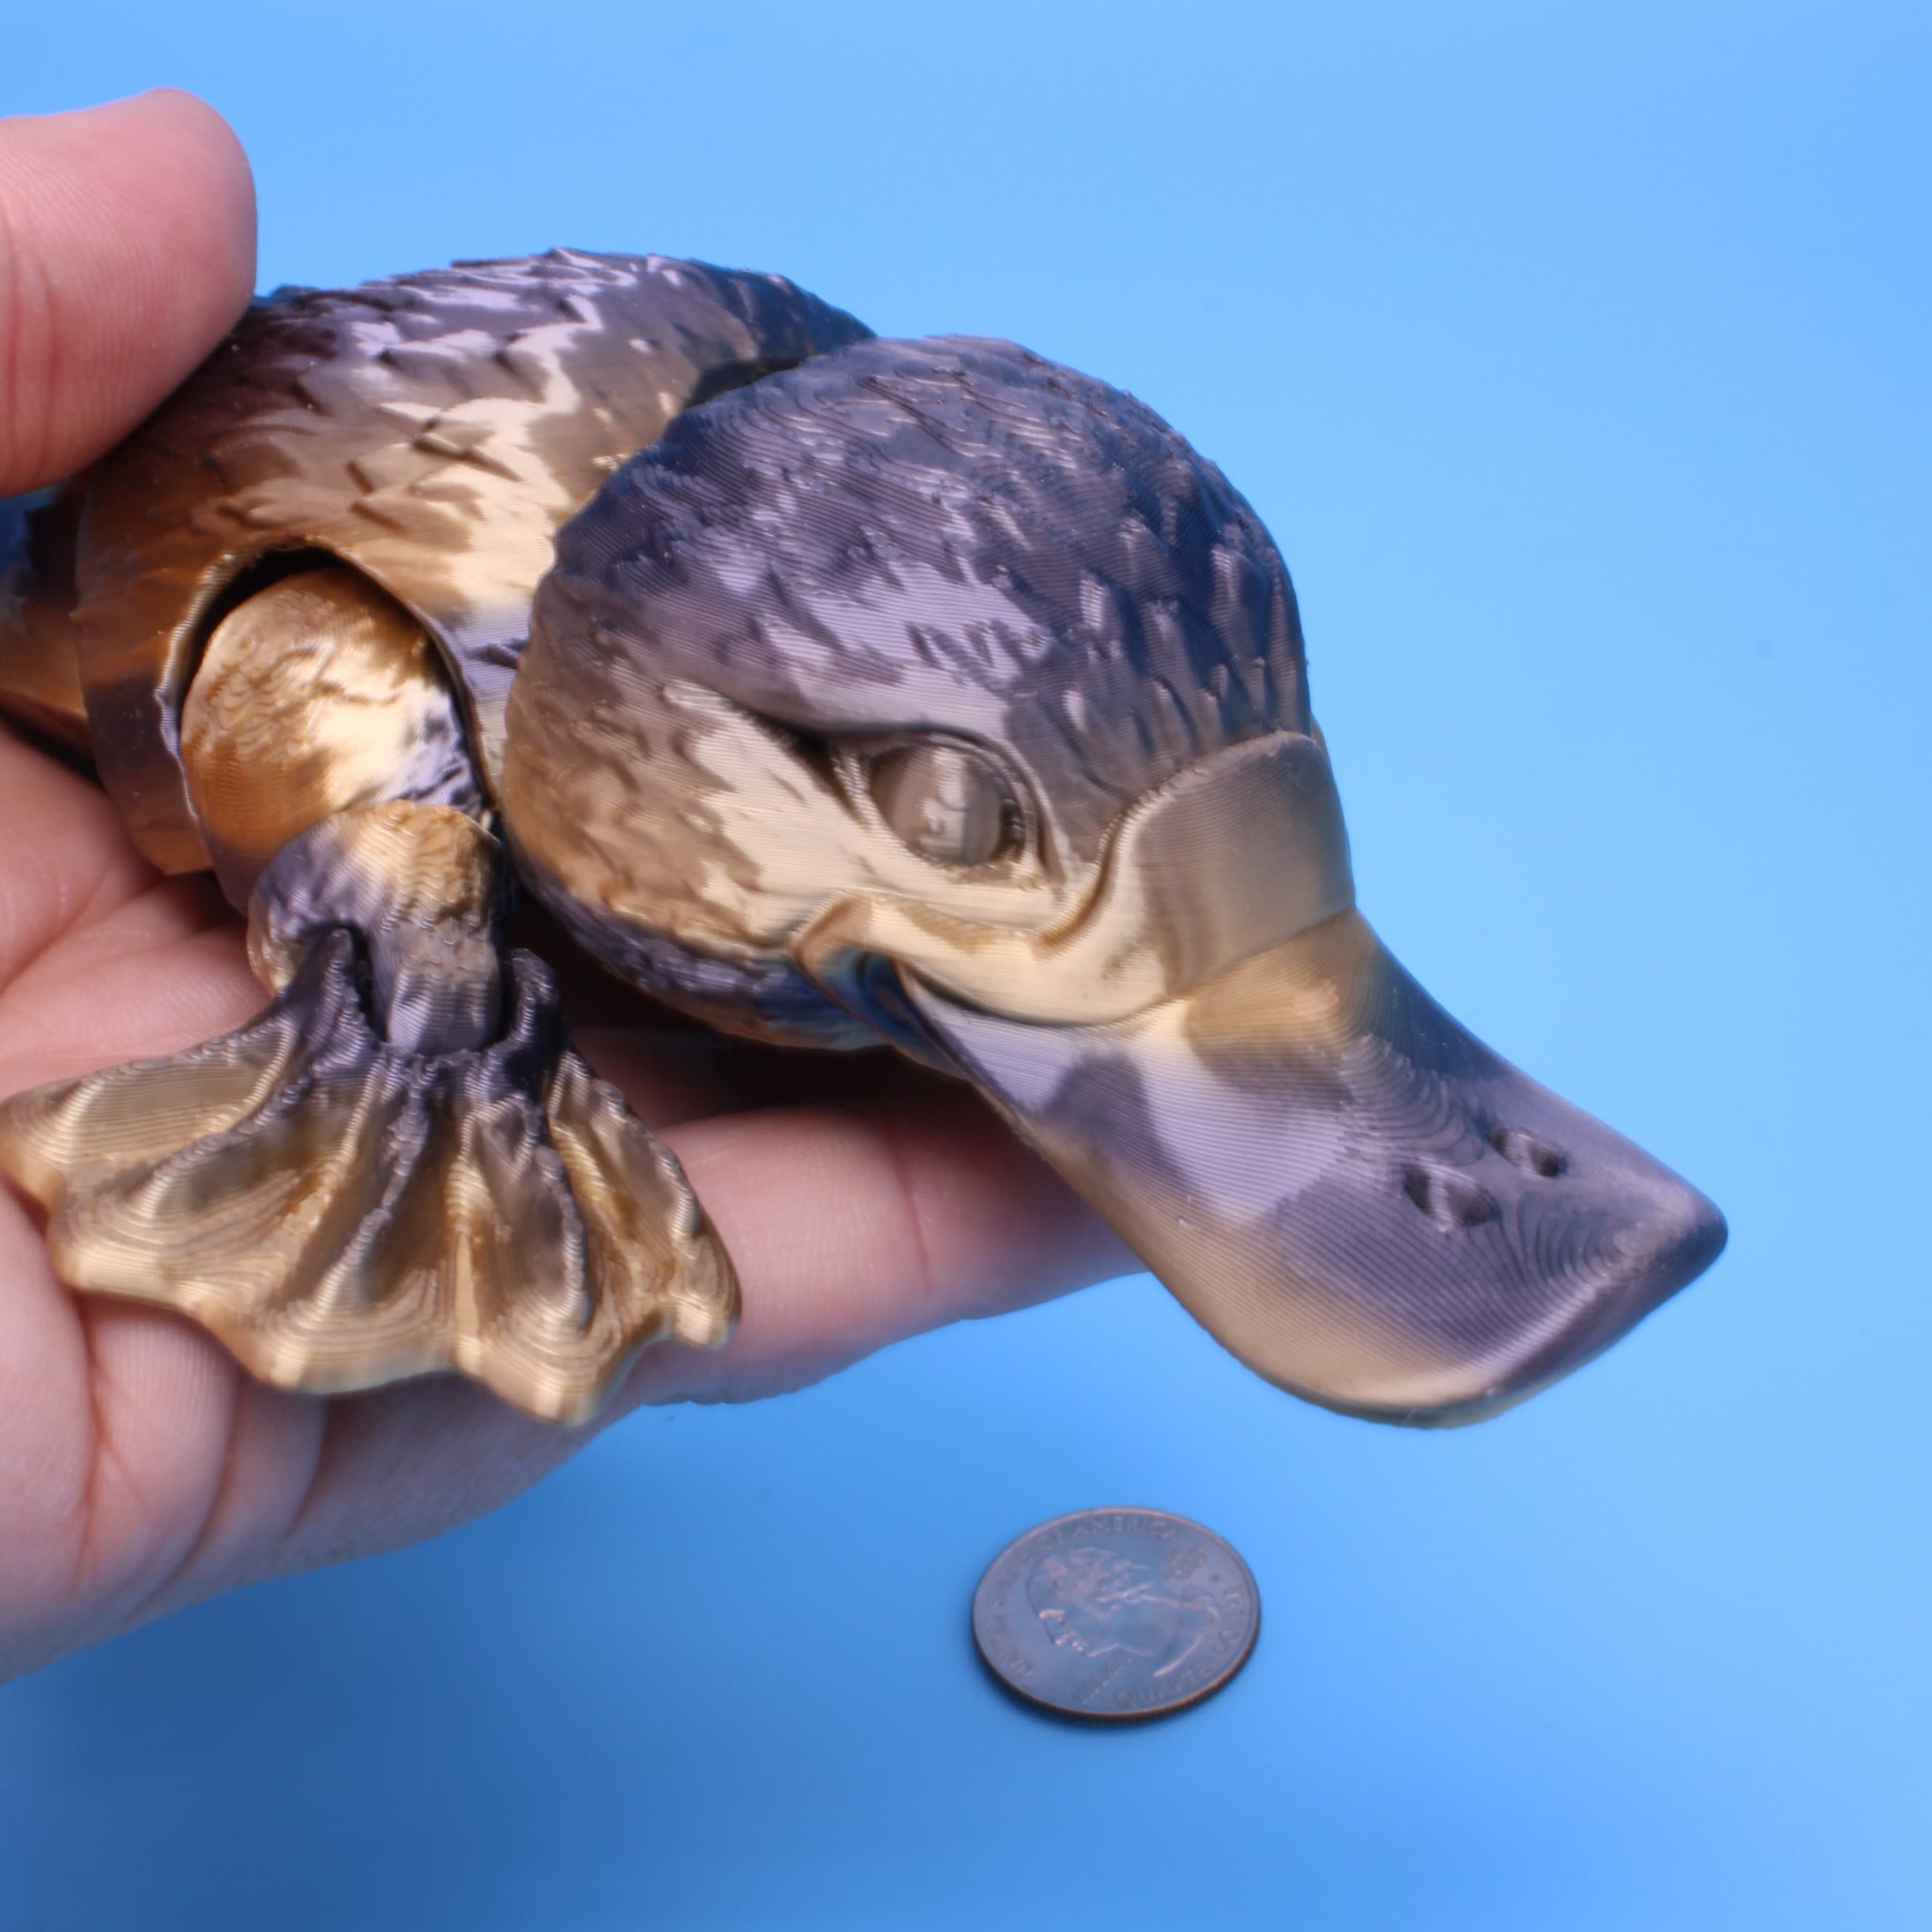 Platypus 3D Printed - Authorized Seller of MatMireMakes